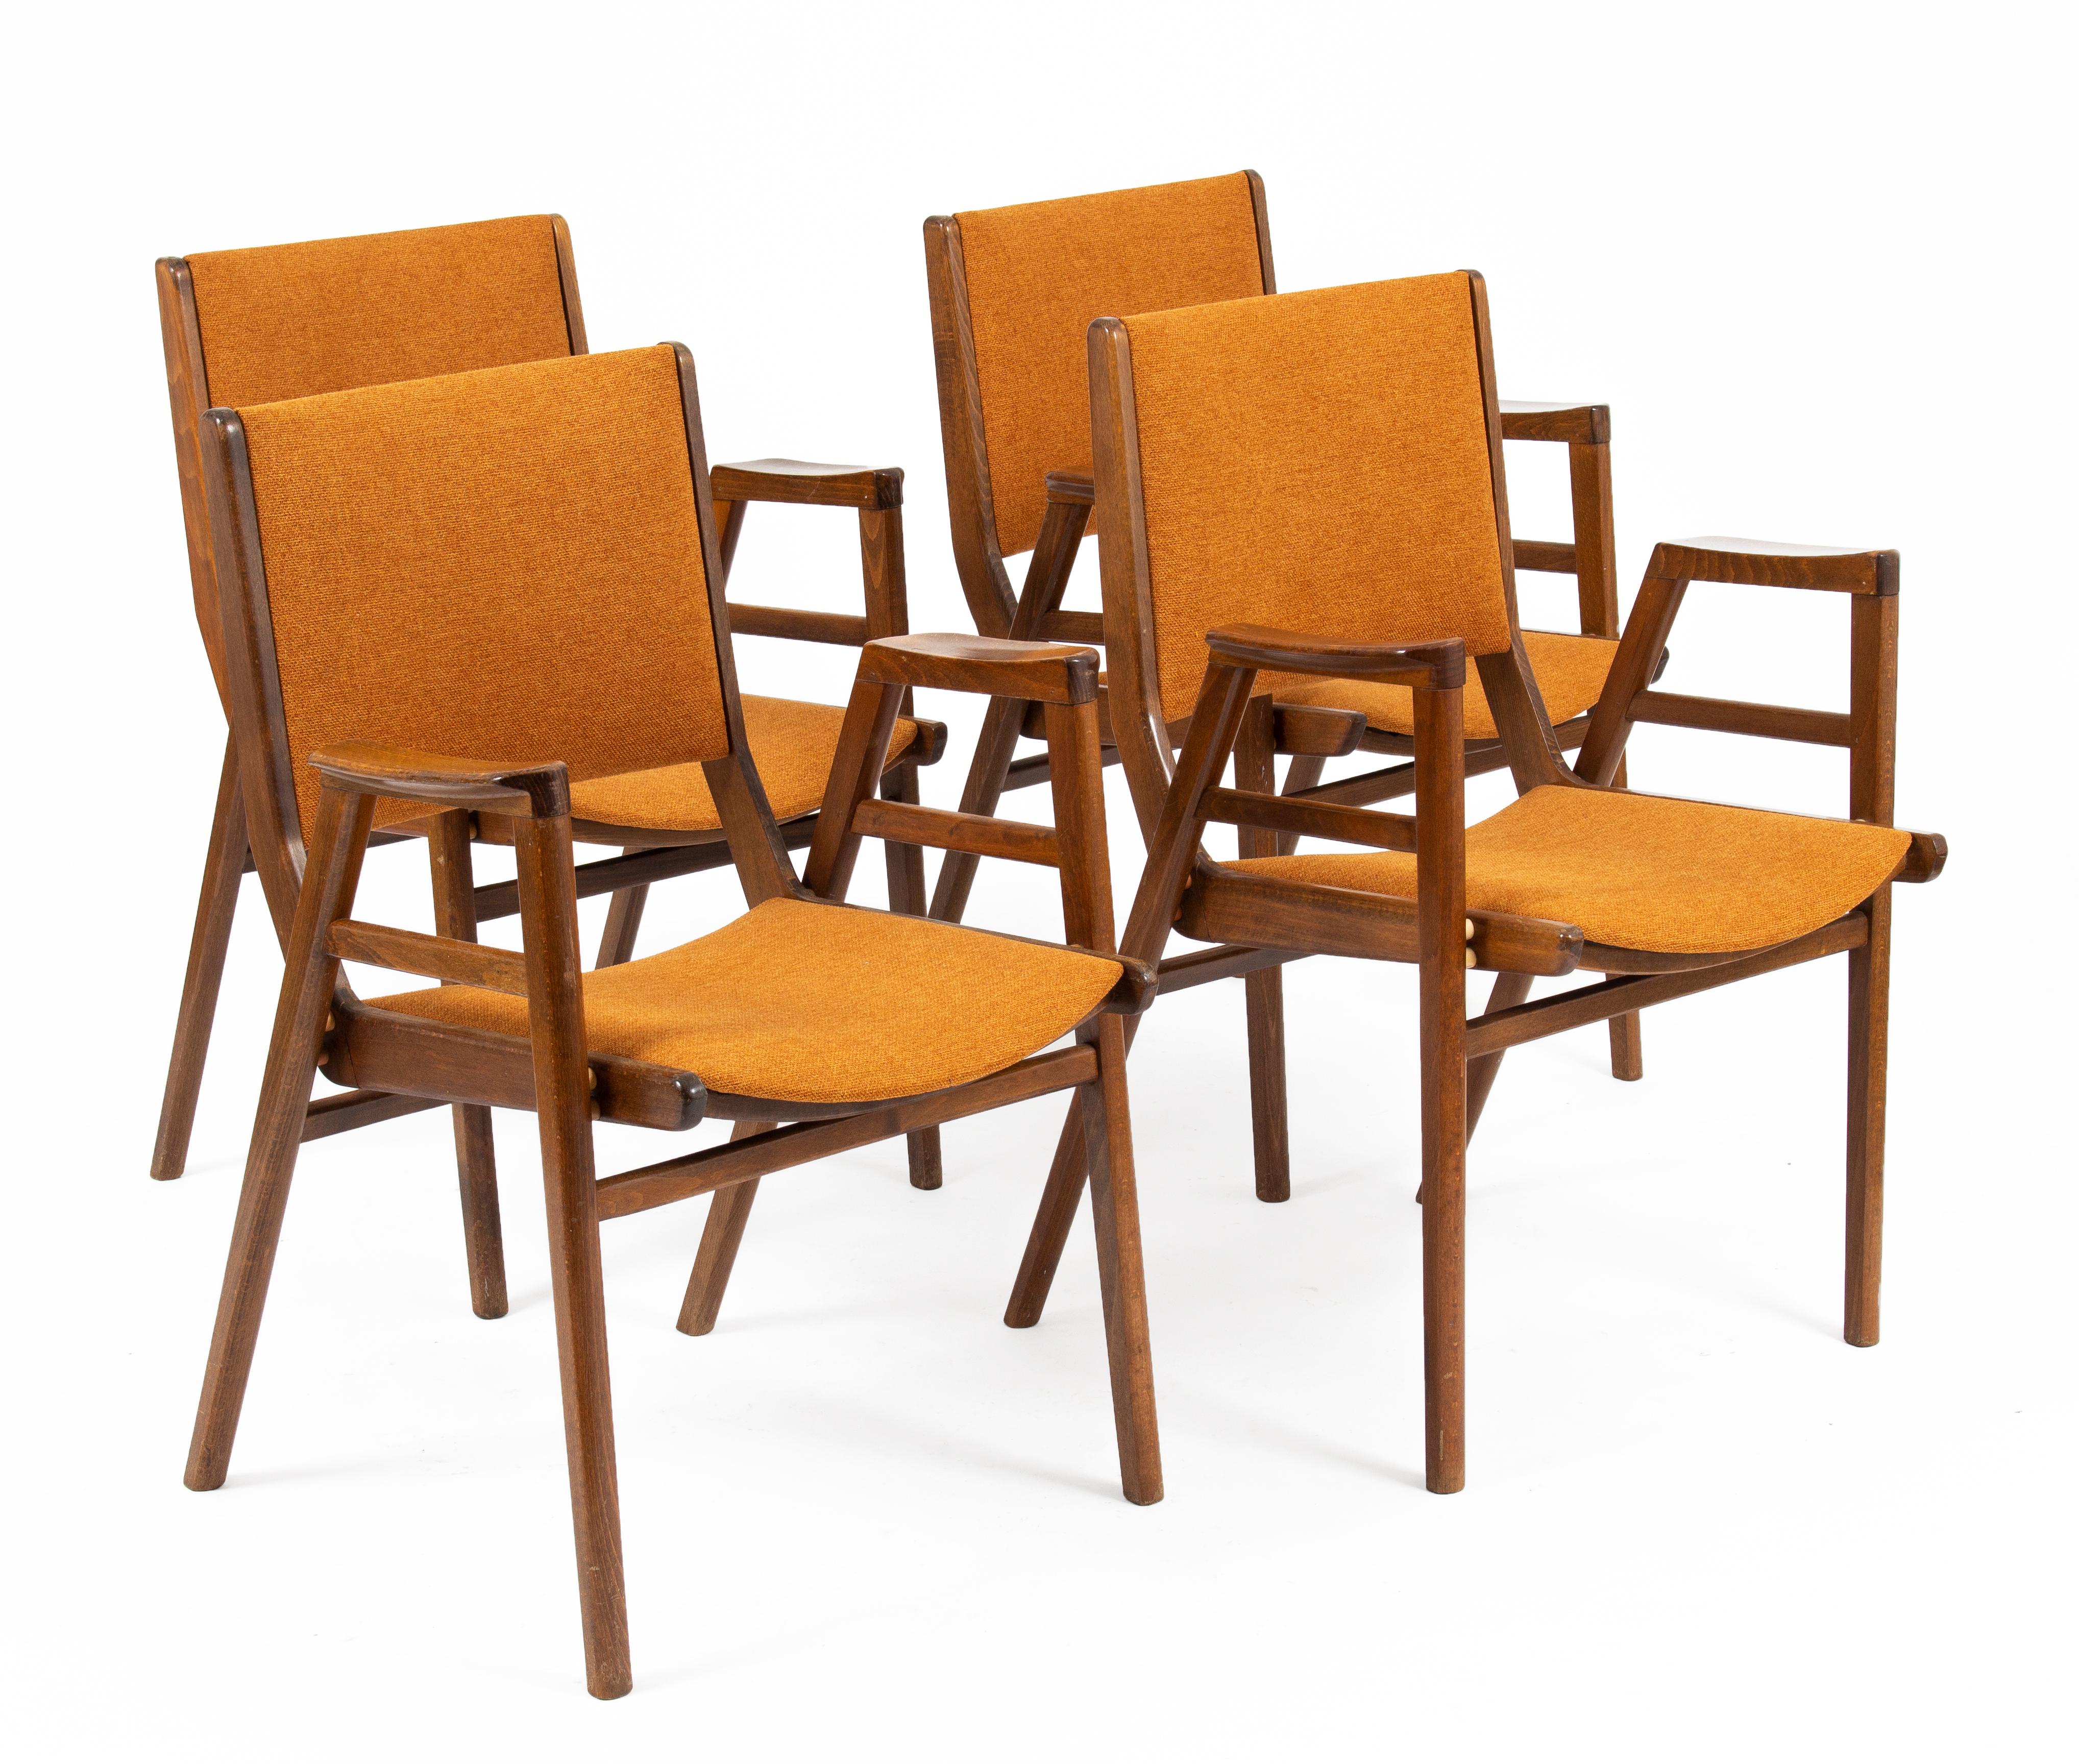 4 stacking chairs designed by František Jirák.
The pieces were manufactured in the 1960s in Czechoslovakia.
The Mid-Century Modern style pieces complement any contemporary or classic space, they are comfortable and practical.
The chairs are in